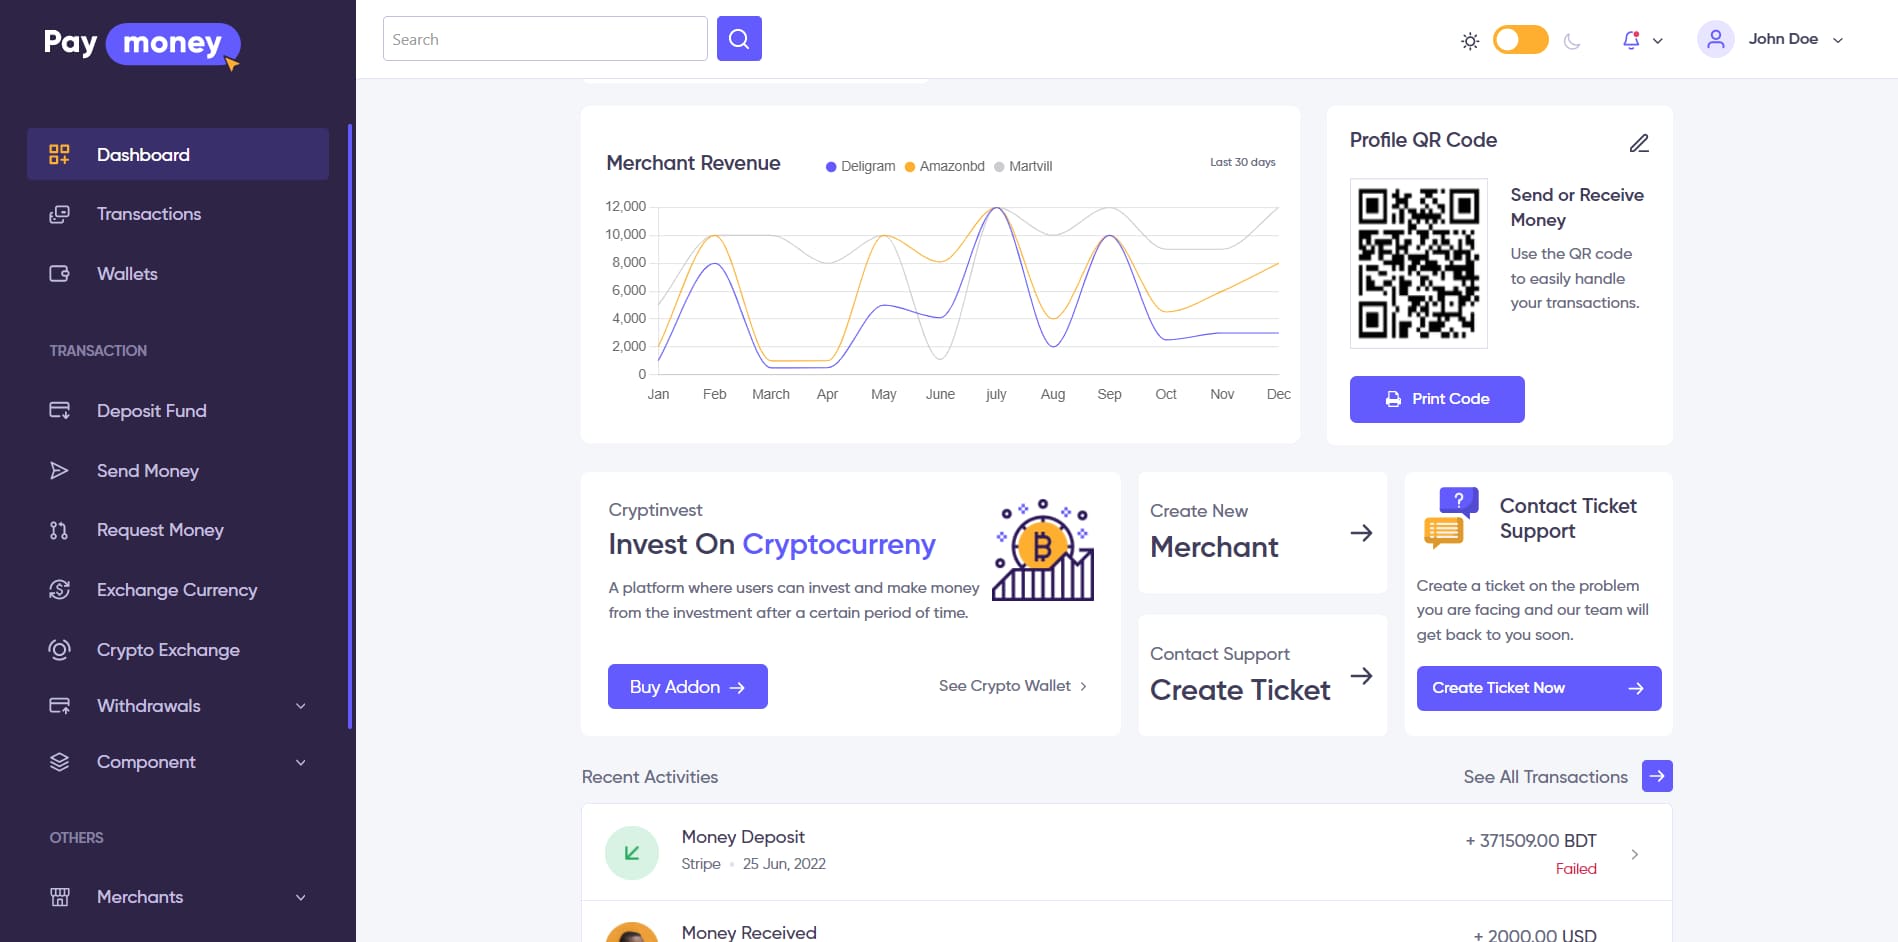 Pay Money New User Dashboard